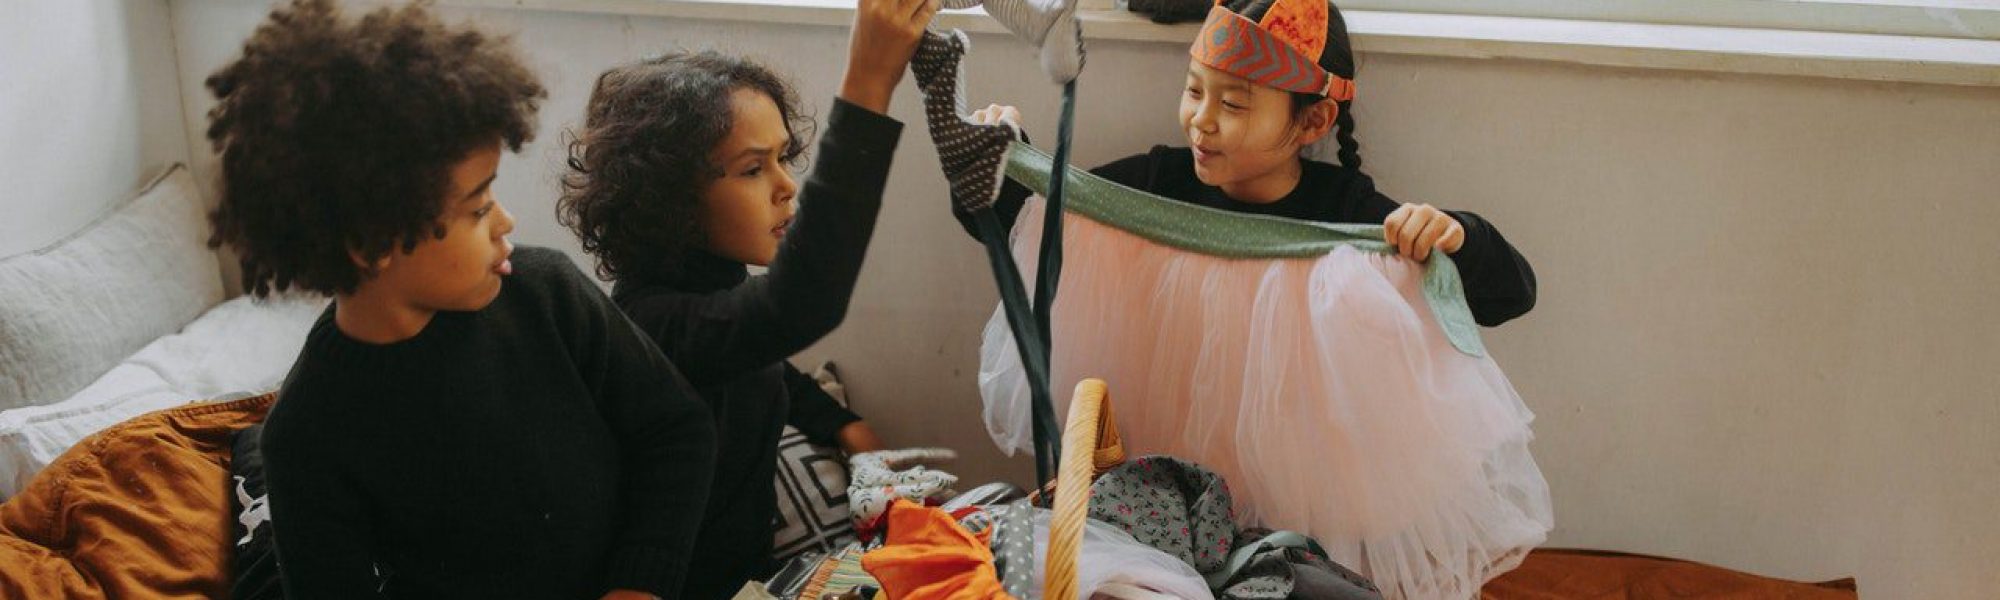 children making costumes in a brightly lit room